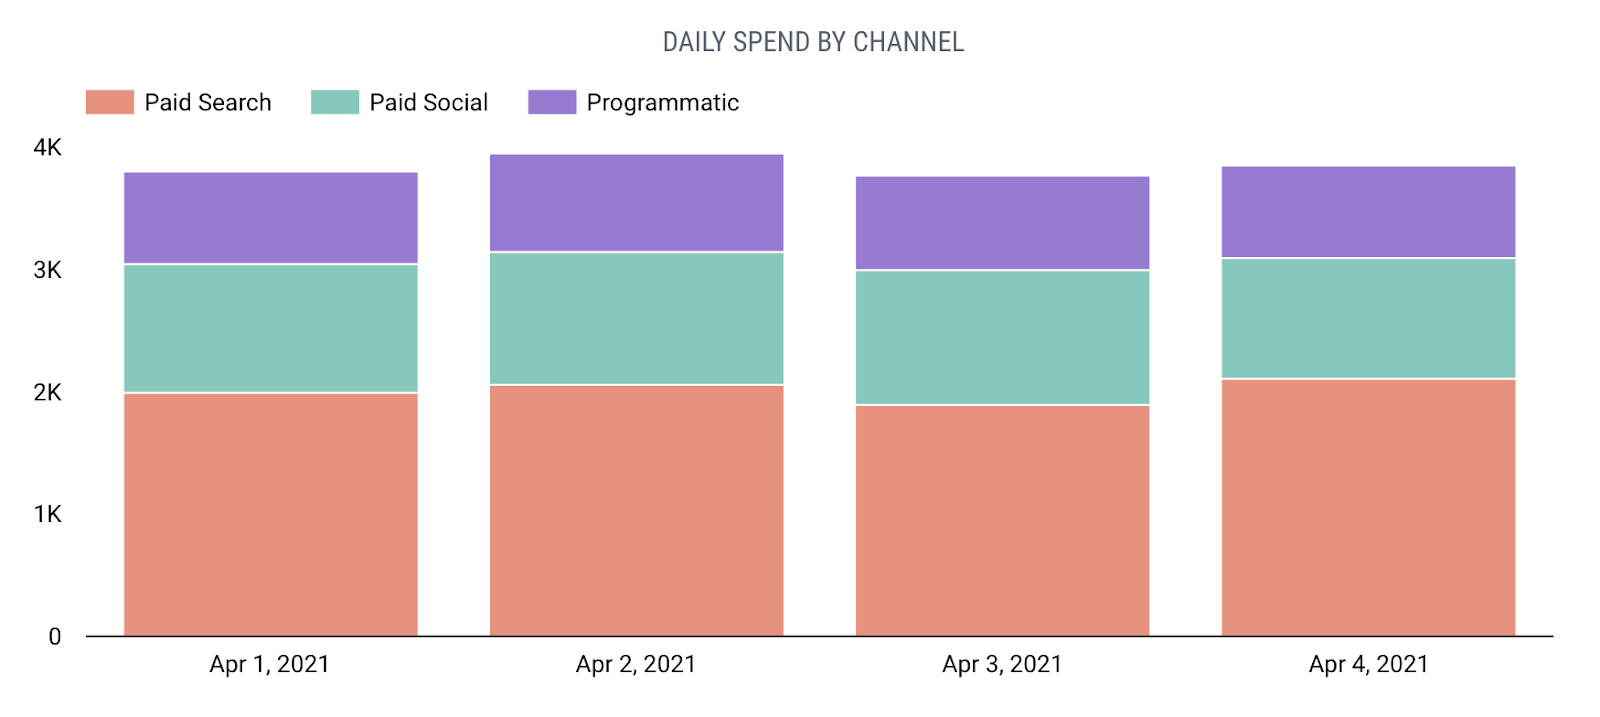 Vertical stacked bar graph visualizing spend by channel